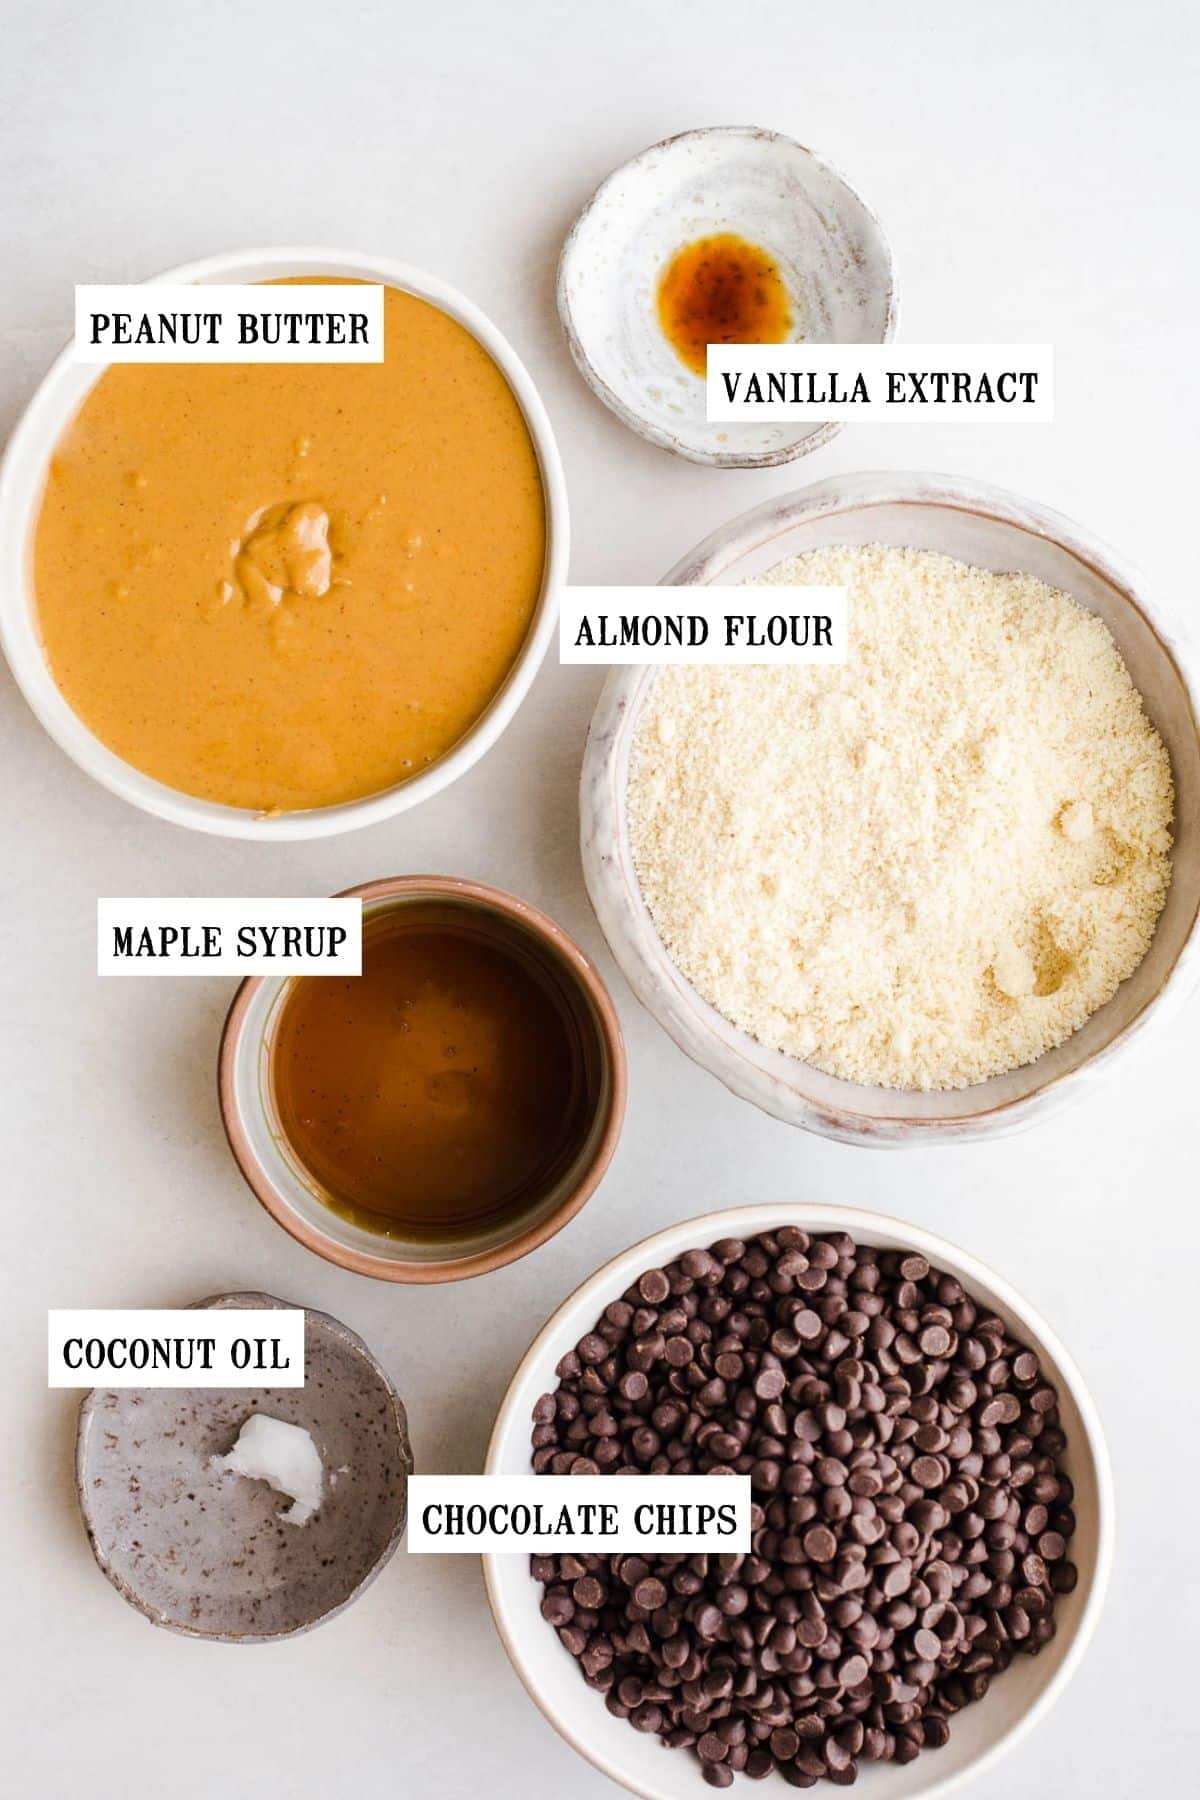 Ingredients to make Easter candy in separate bowls.